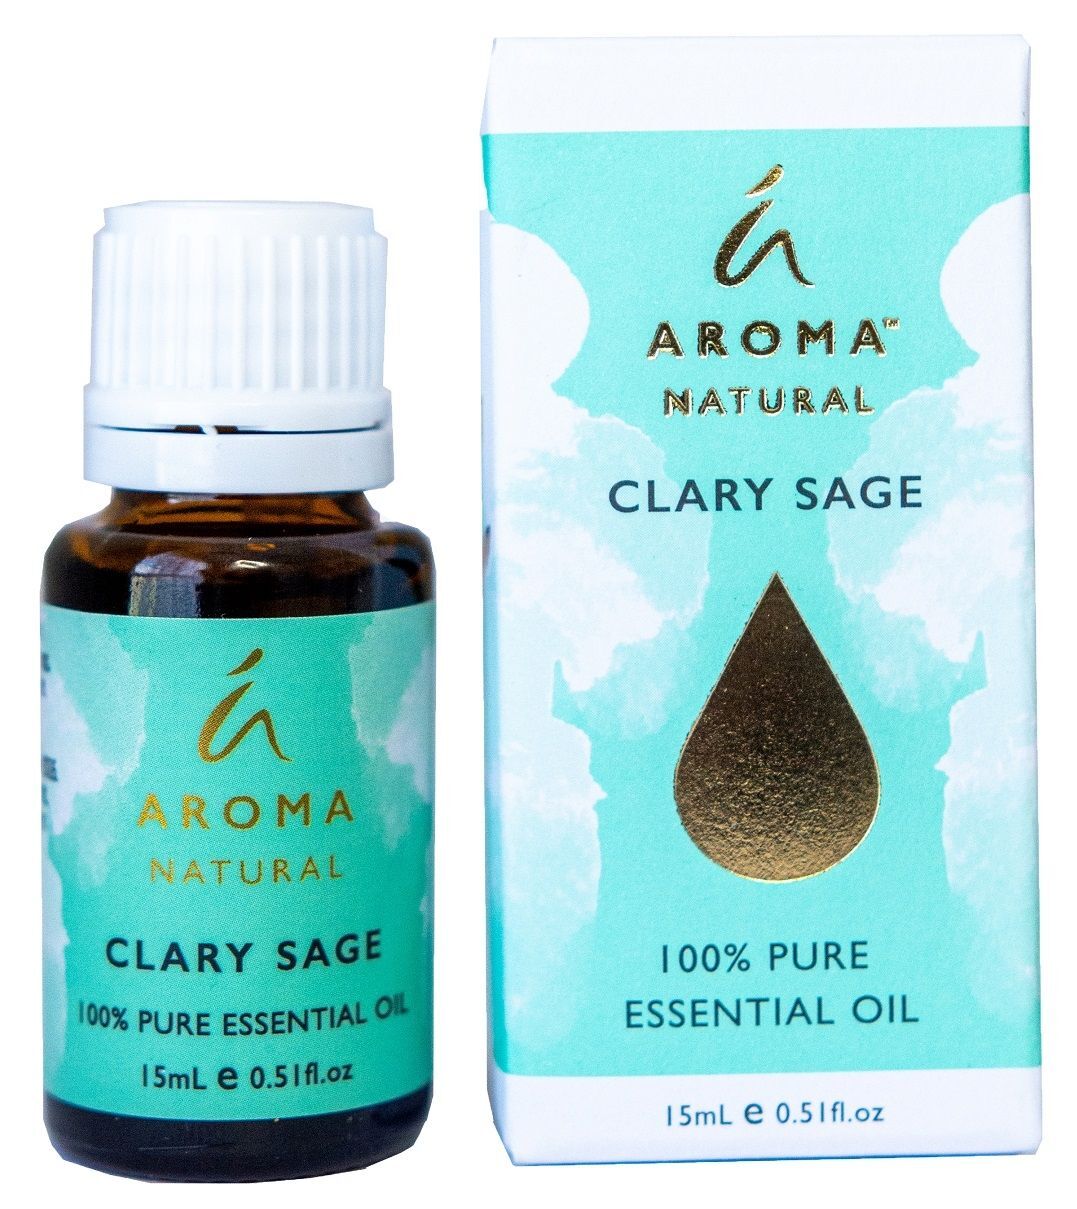 Aroma Natural by Tilley - Clary Sage 15ml 100% Essential Oil